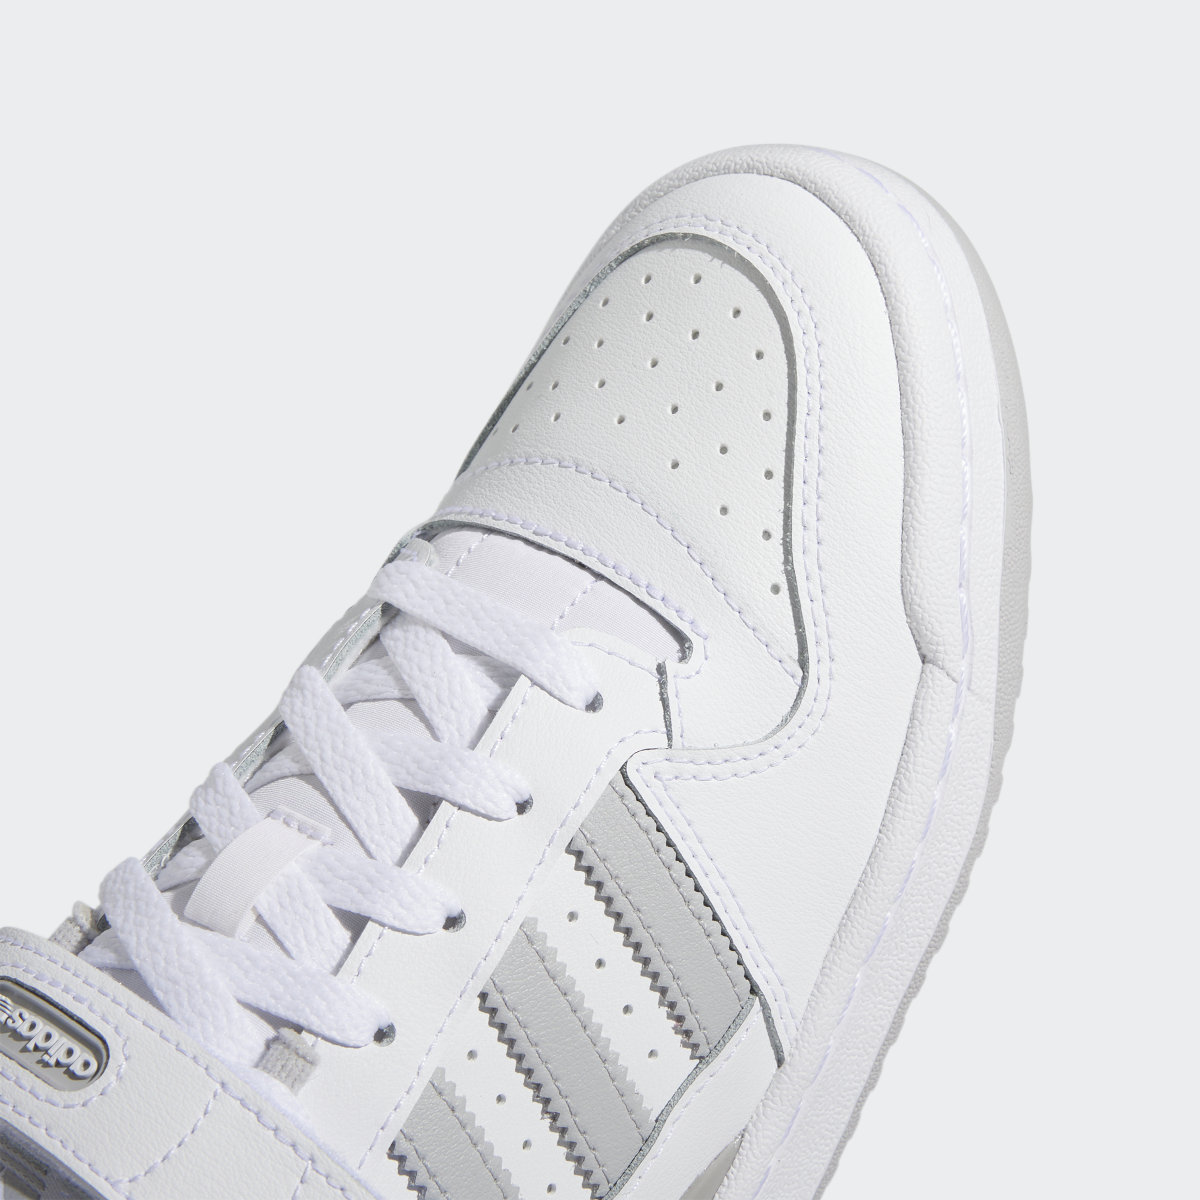 Adidas Forum Low Shoes. 9